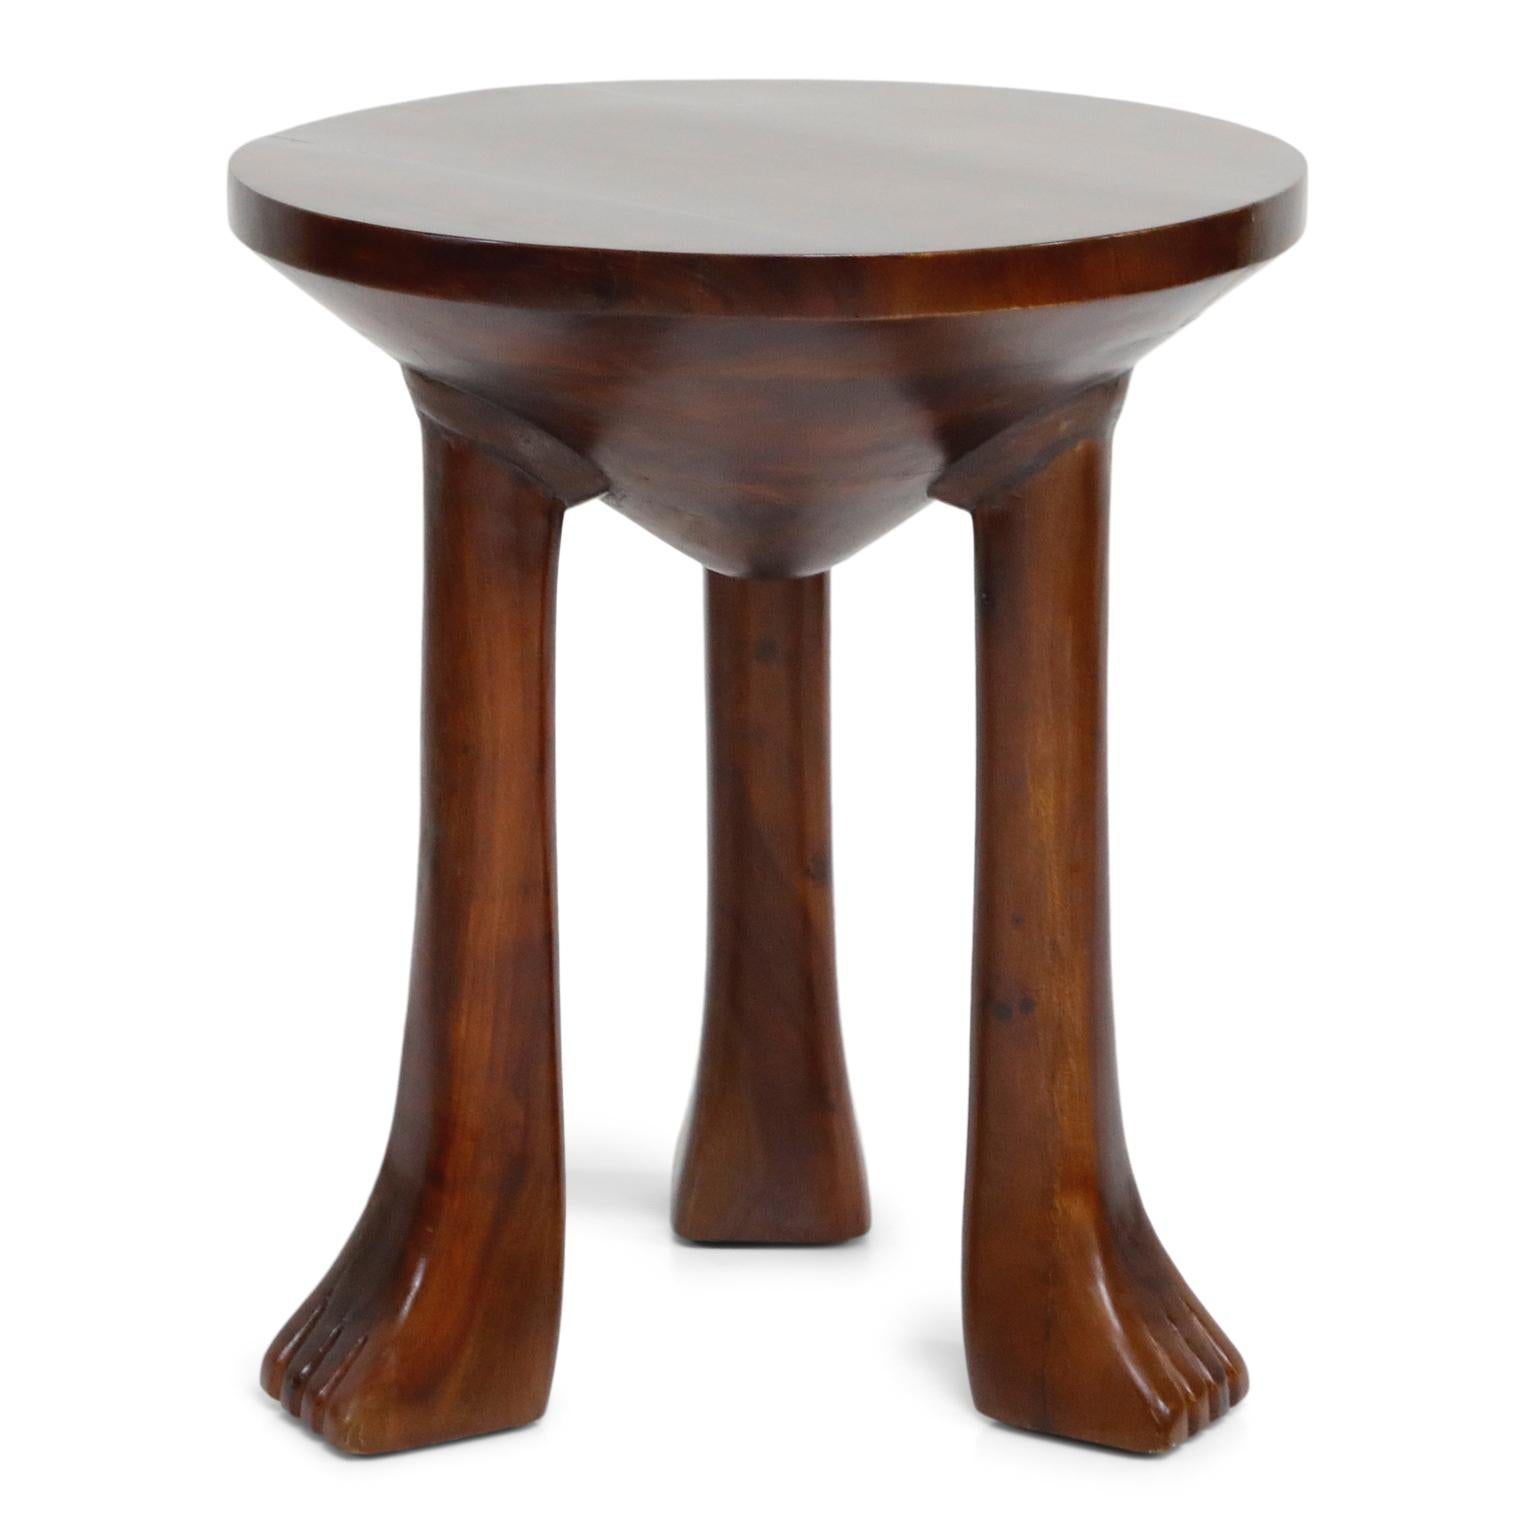 Tribal Carved Teak Three-Legged Lionfoot Side Tables in the Style of John Dickinson